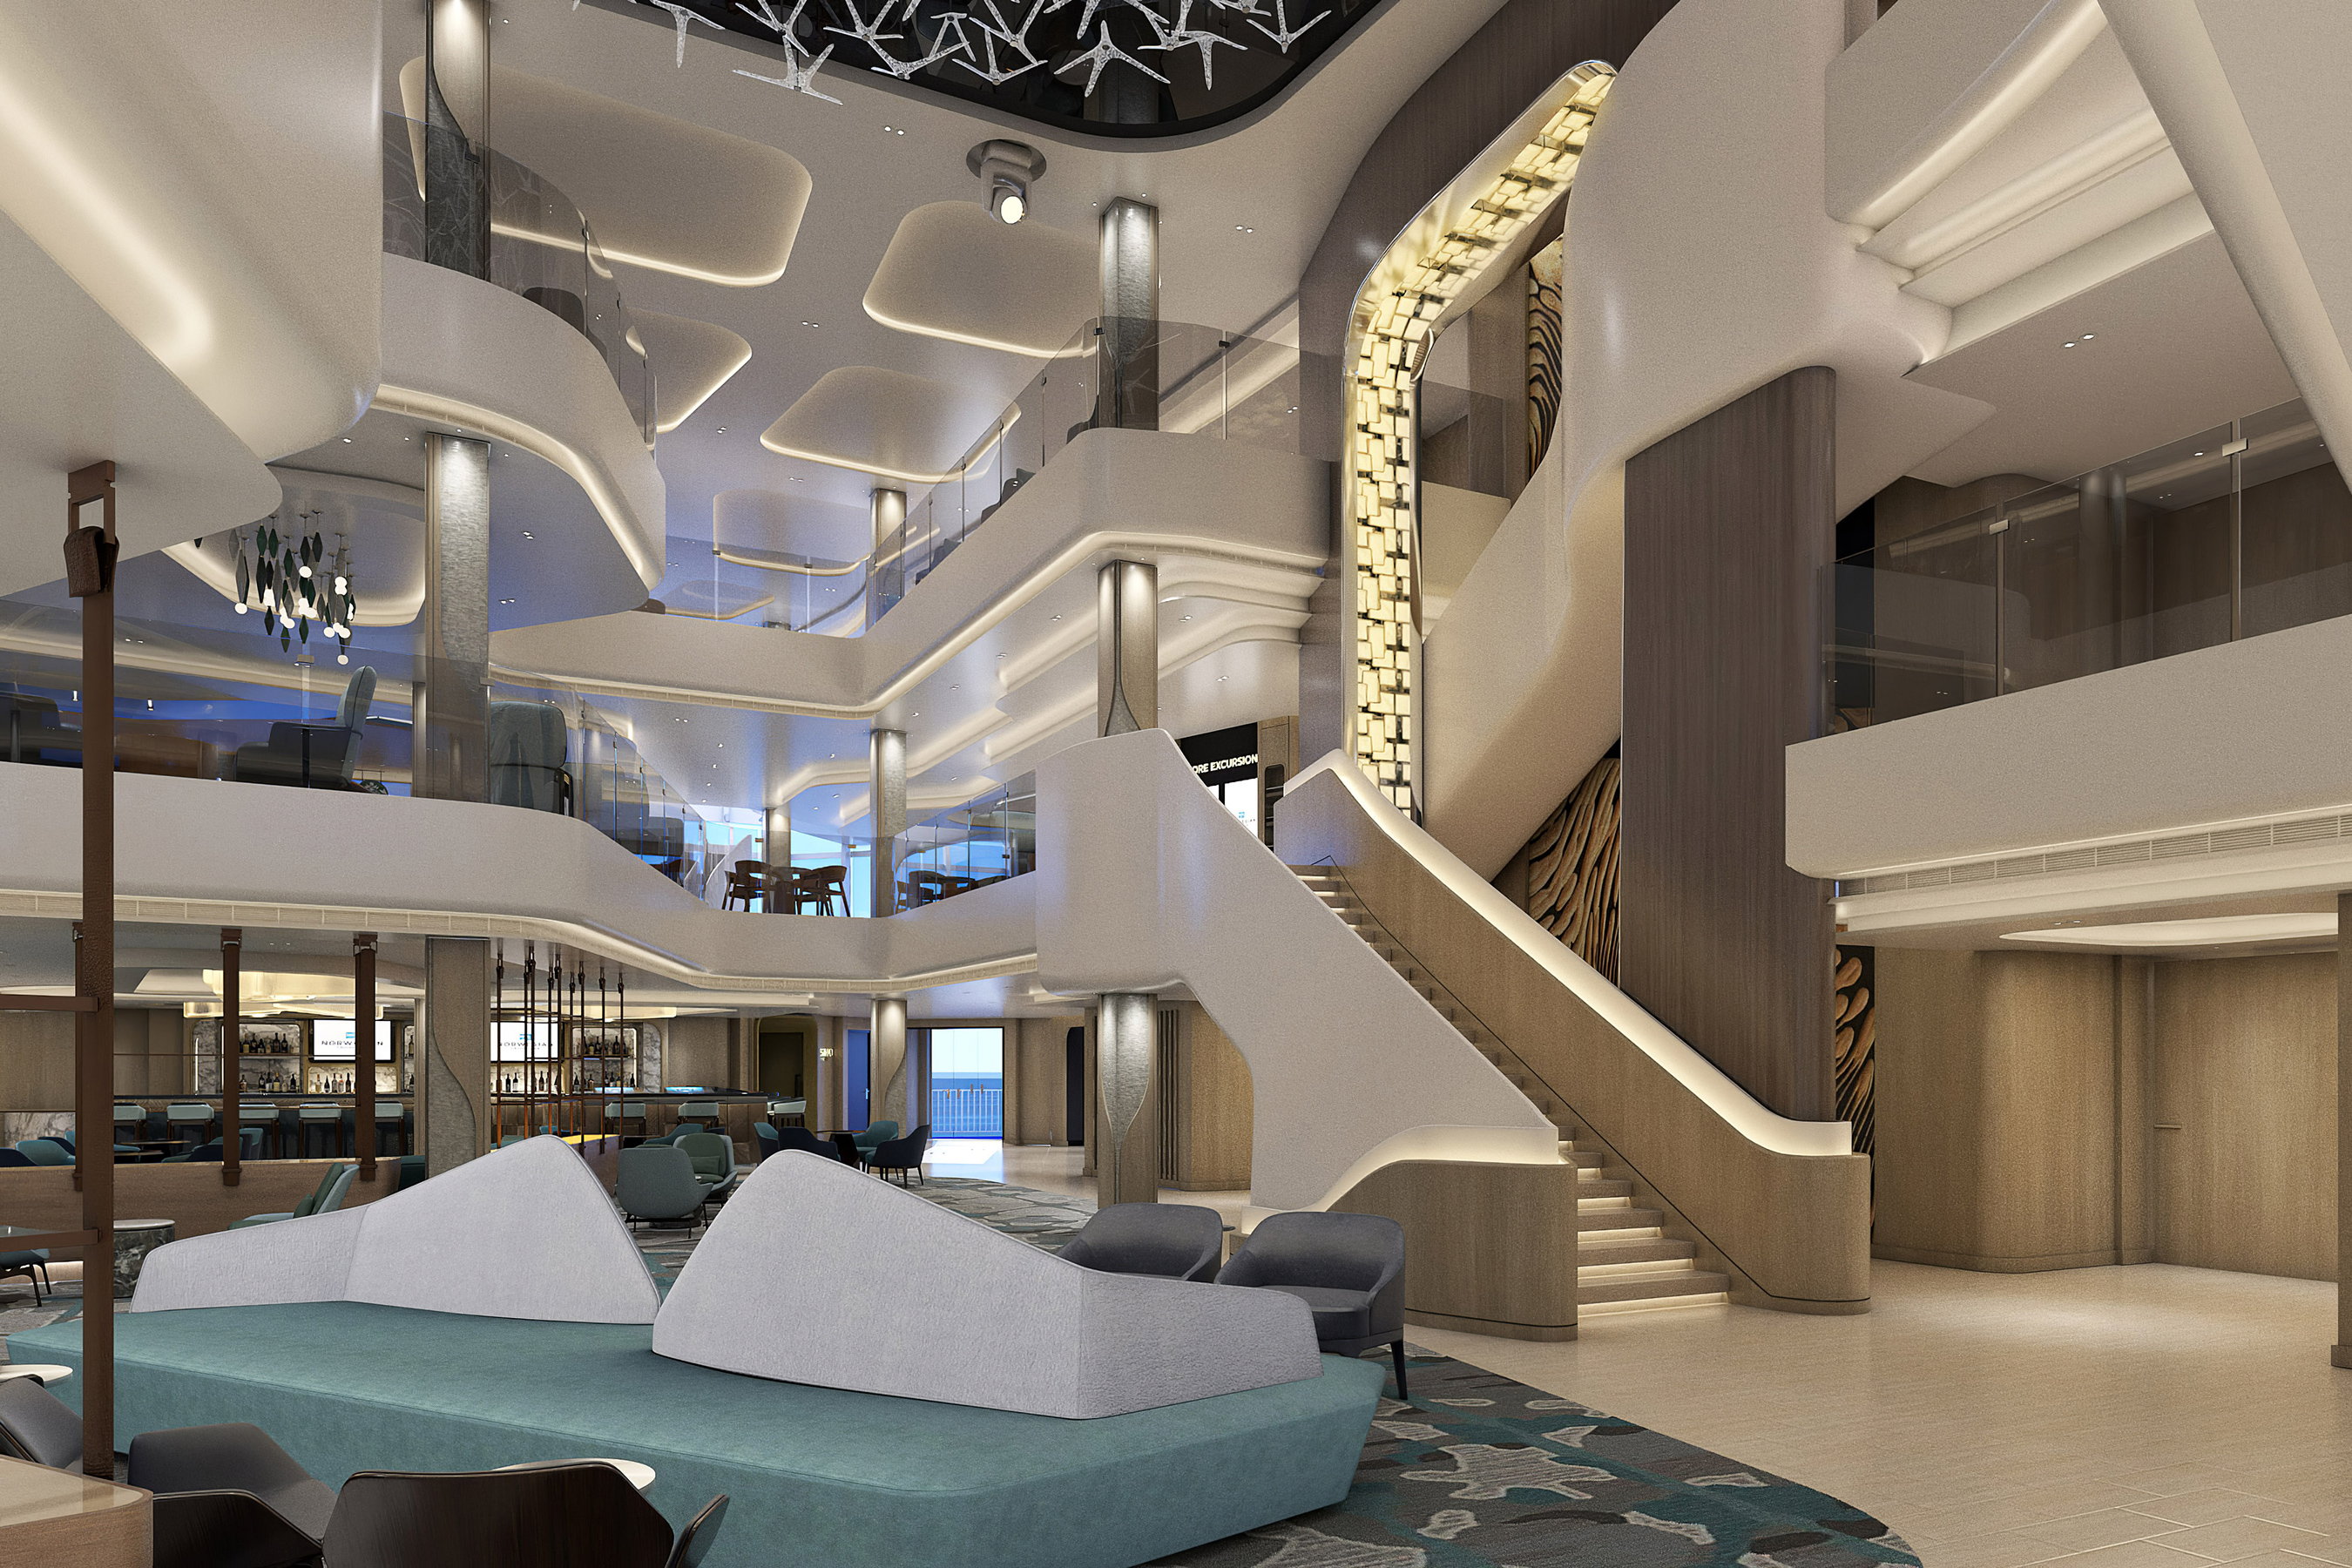 The Penrose Atrium, NCL’s first three-story, glass-walled atrium spanning decks six, seven and eight will be one of the focal points on Norwegian Prima and Viva. The space, designed by Miami-based Studio Dado, will feature retail spaces and high-end luxury shops, as well the Brand’s newest Starbucks Coffee, Prima Casino, The Penrose Bar and more.